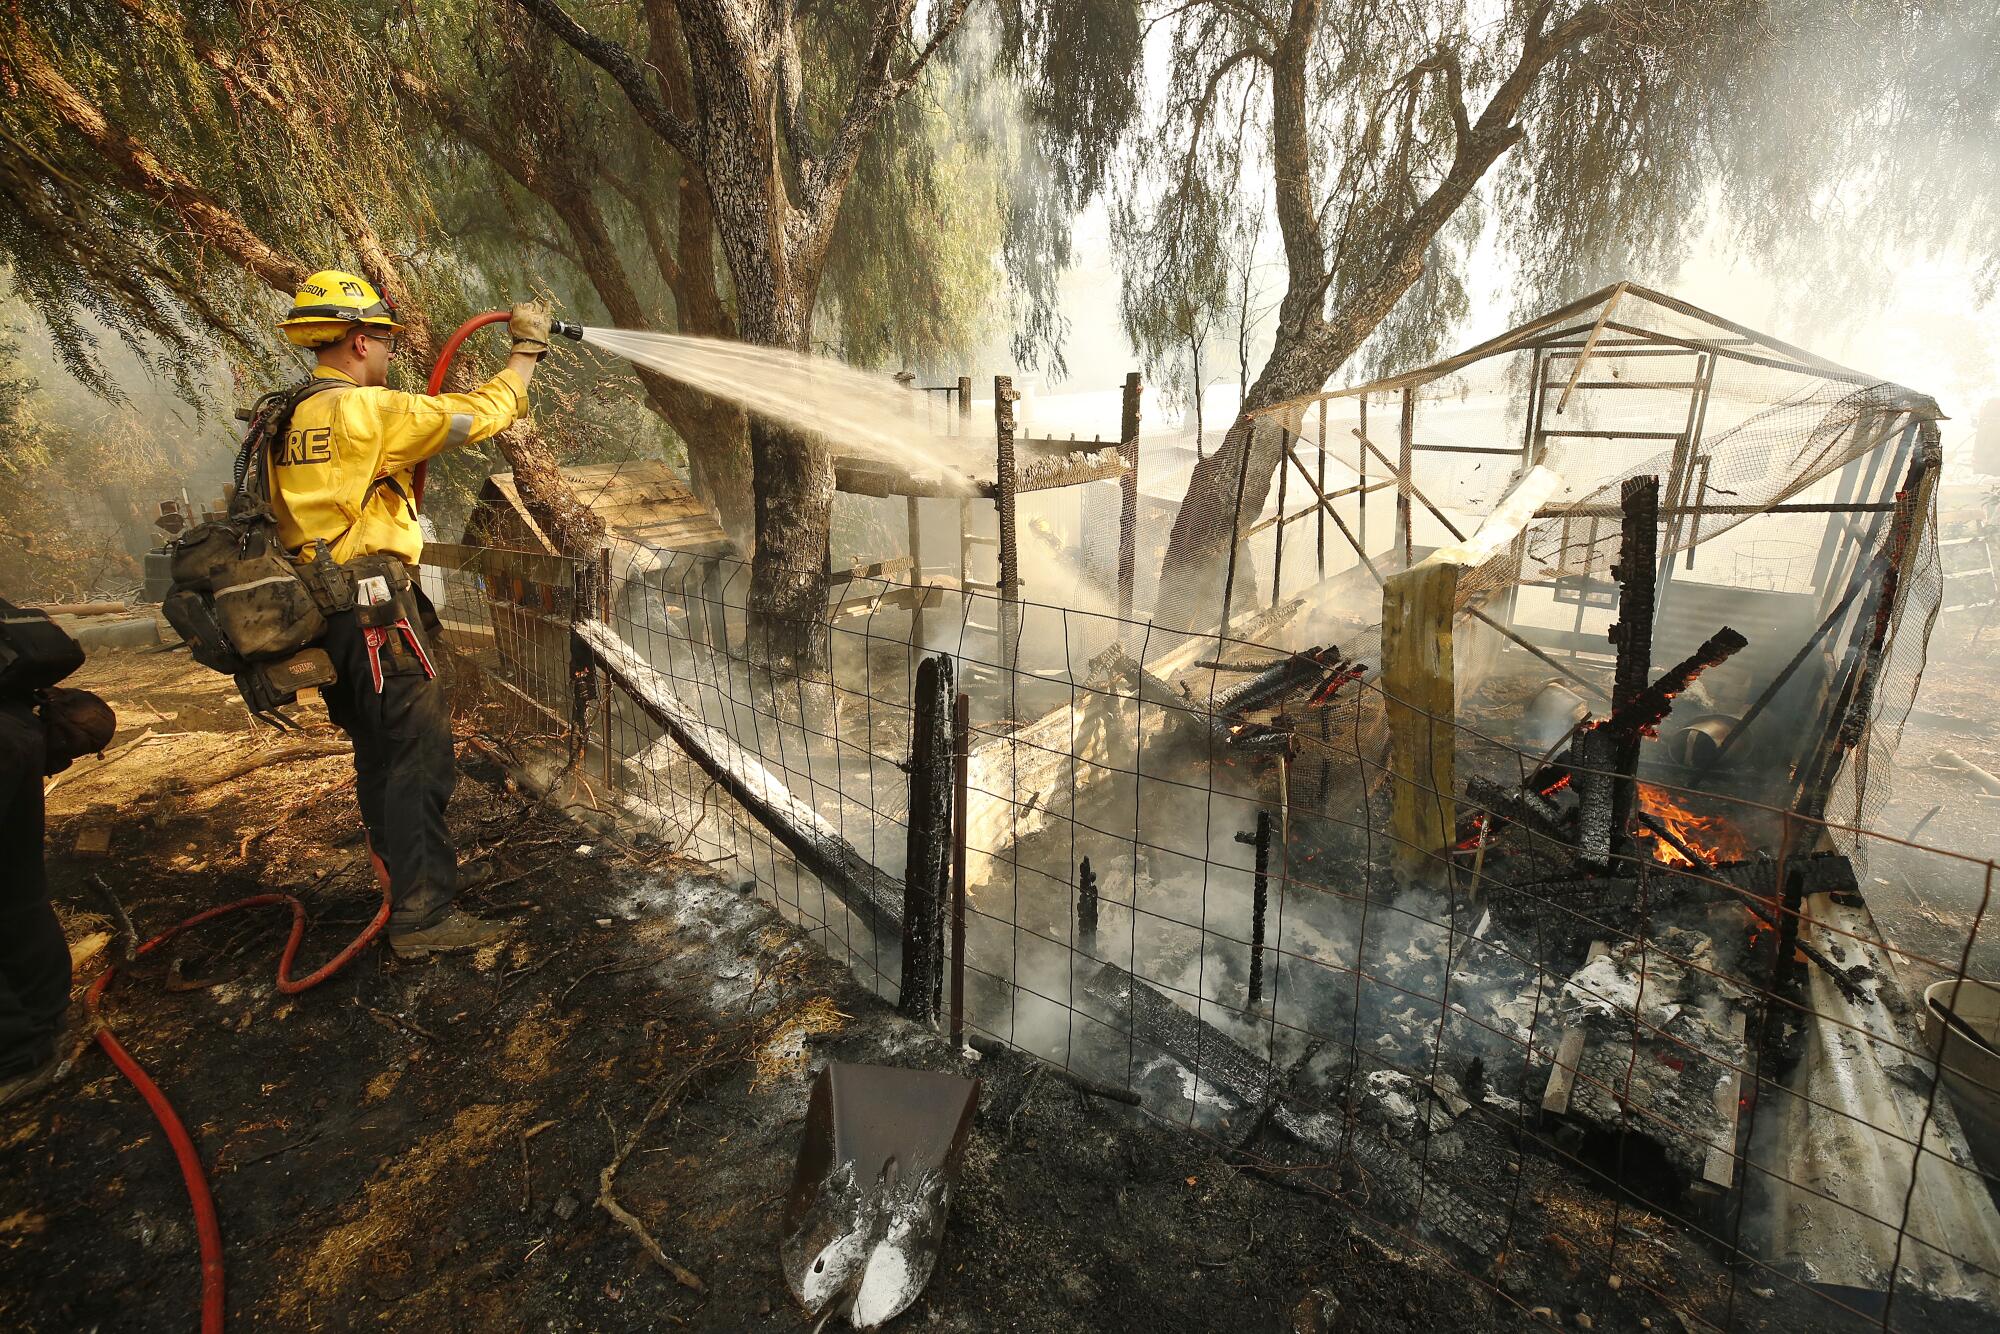 A firefighter uses a small hose to wet down the remnants of a burning animal pen